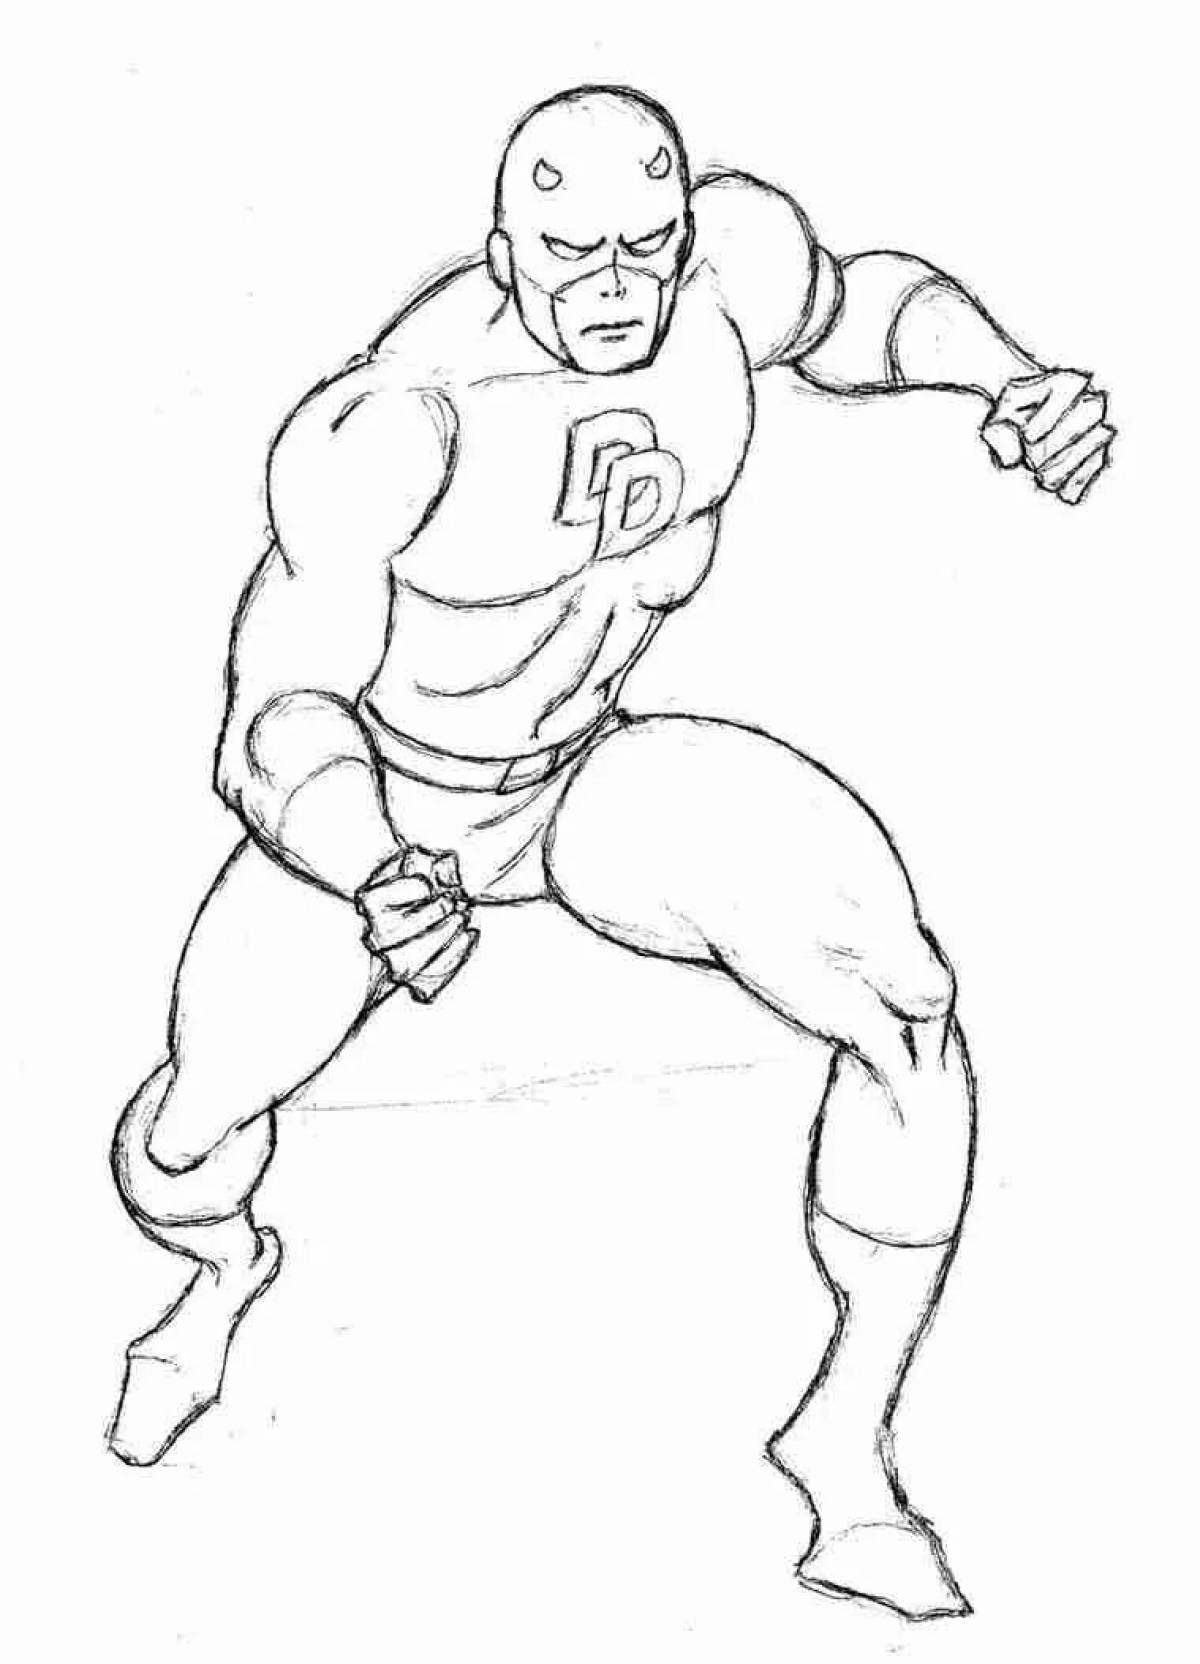 Daredevil coloring page - colorfully bold